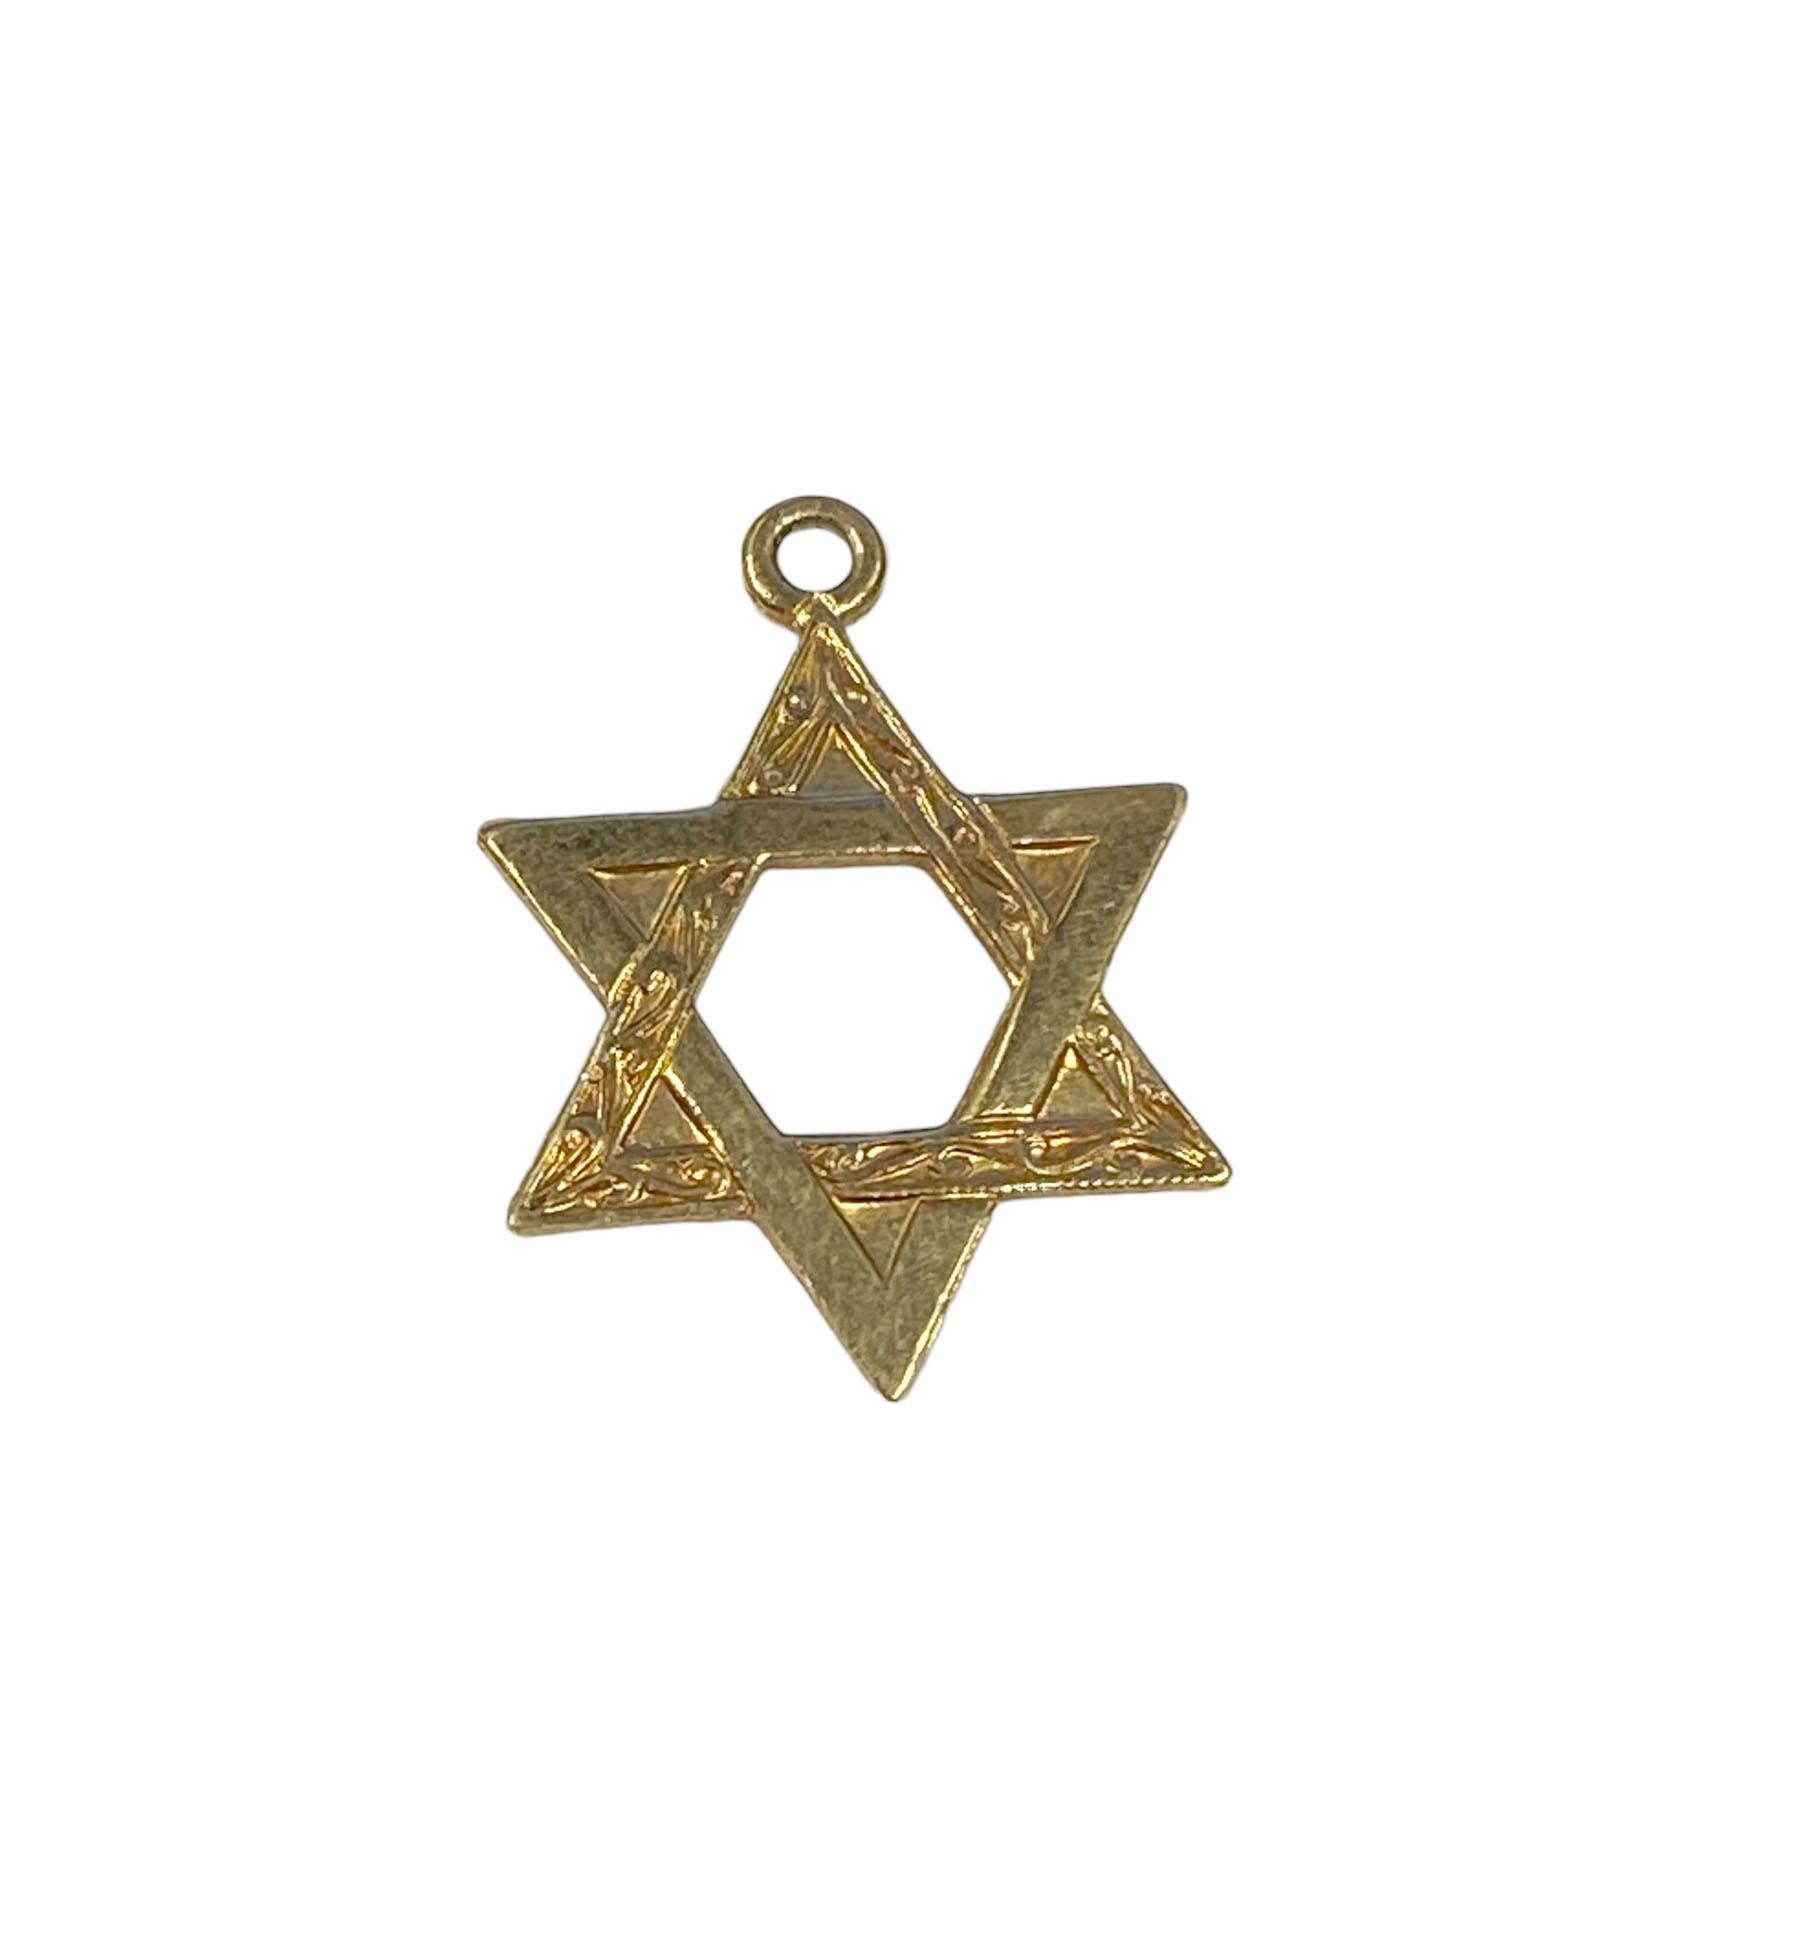 From the Estate of Hollywood Icon Jerry Lewis, A 14k Yellow Gold Mezuzah measuring 1 inch in length and 3/8 inch wide, having the original Prayer scroll inside and a presentation engraved on the back that is dated 1956, accompanied with a 14k Yellow